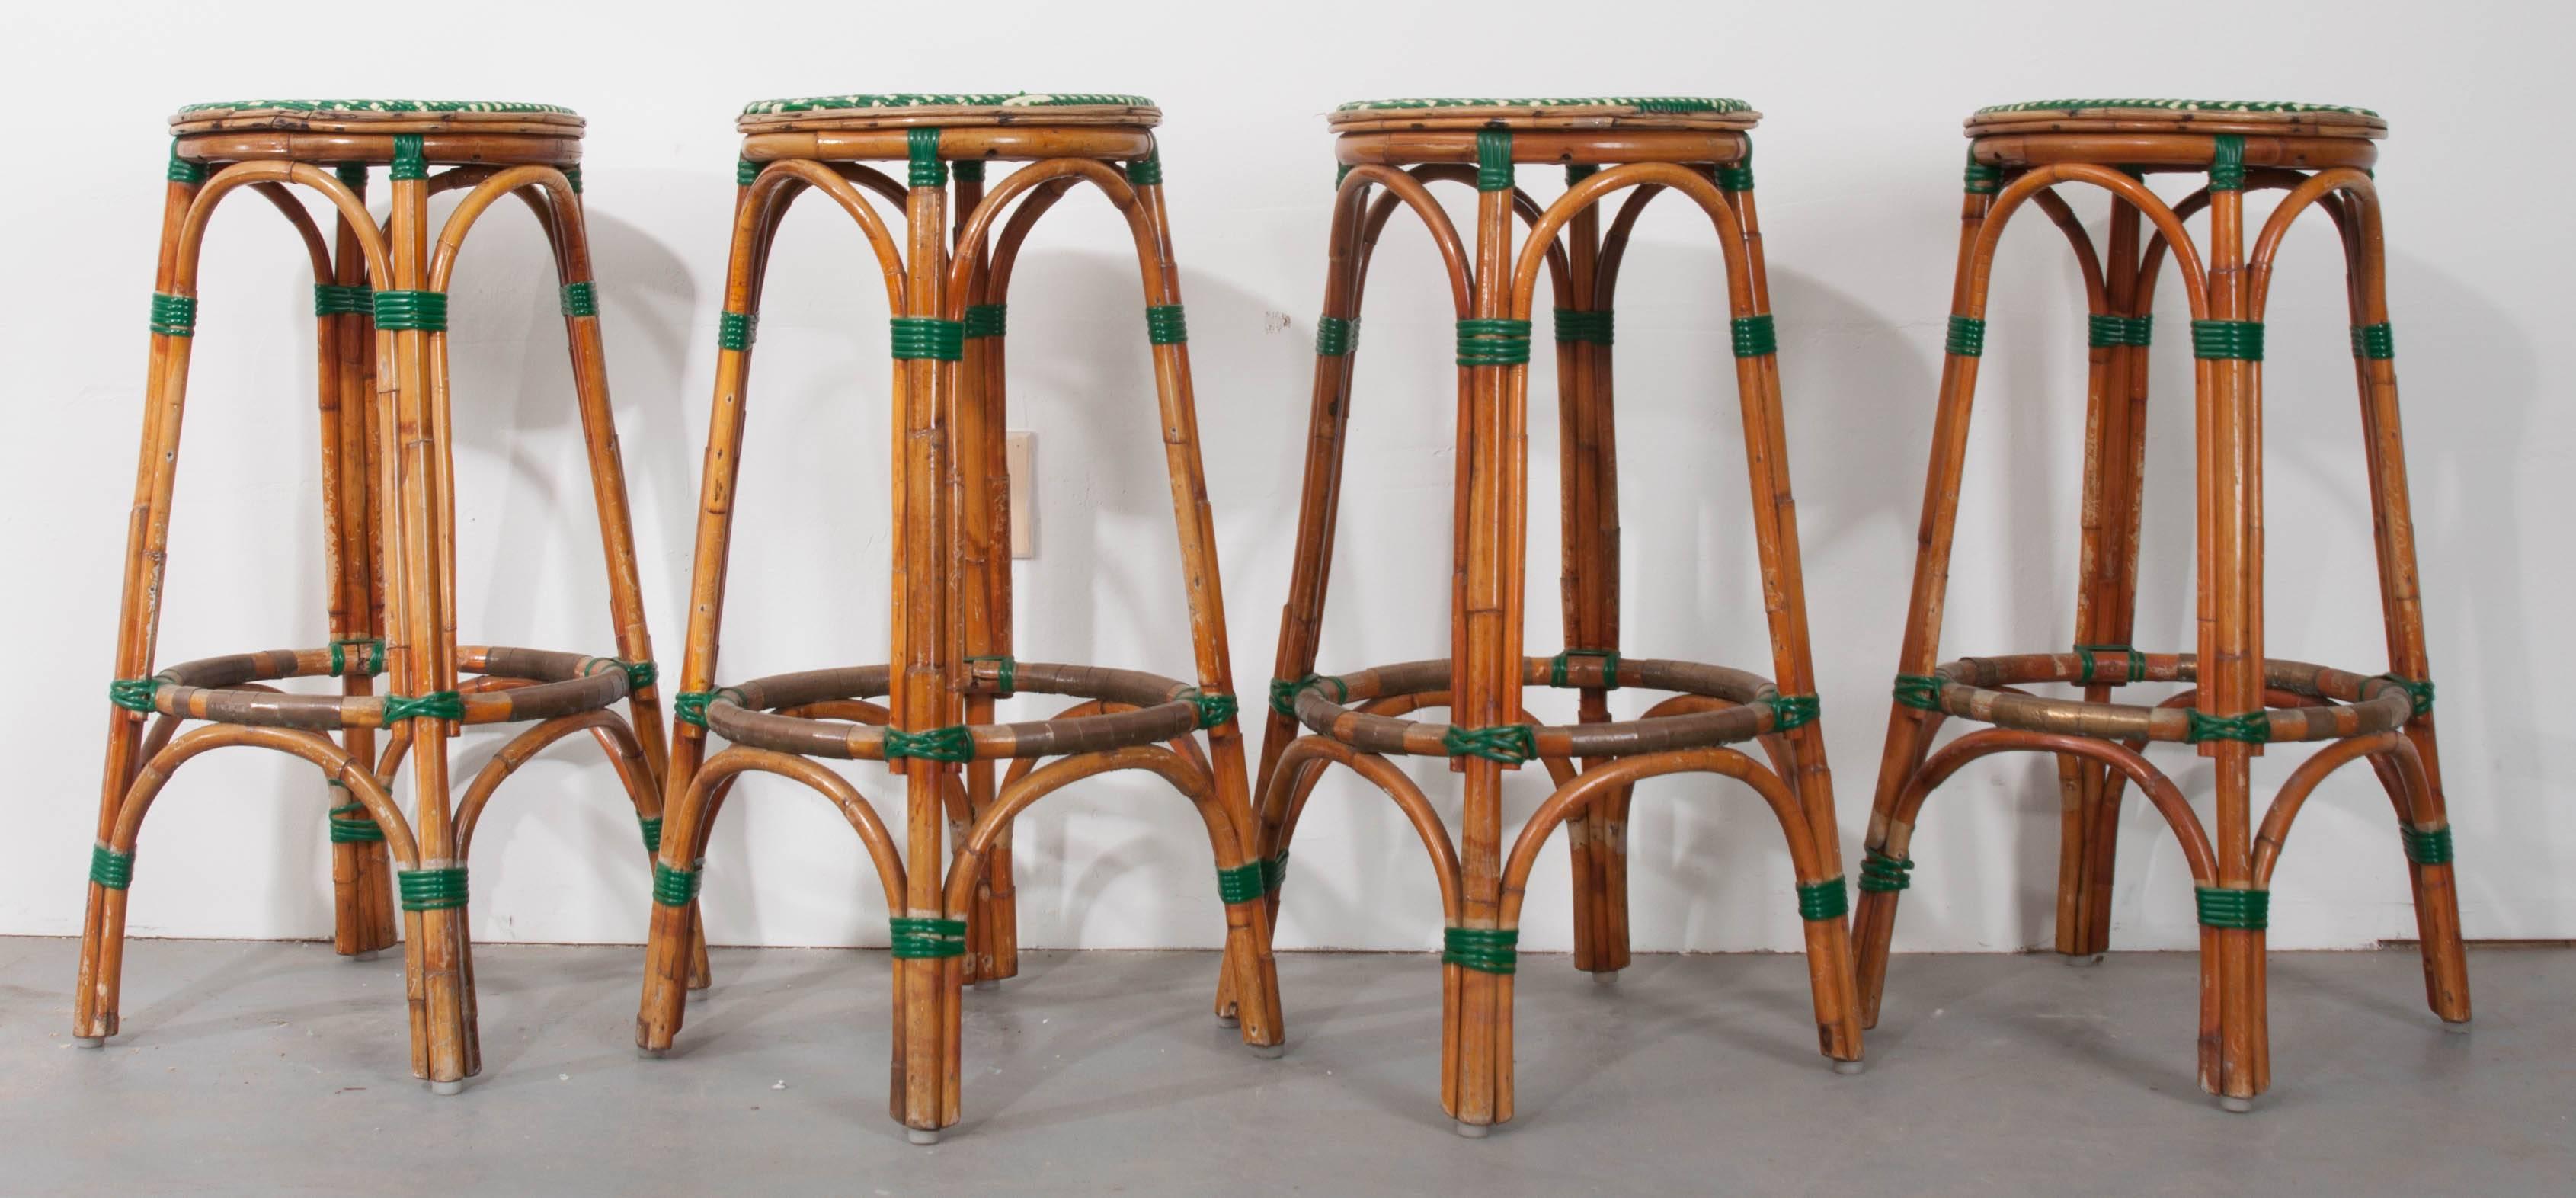 A fabulous set of four French vintage rattan bar stools with green and ivory seats and matching green banding to stabilize their bases. The Classic style of these bistro stools is quintessentially French. Measures: The stools have seats with a